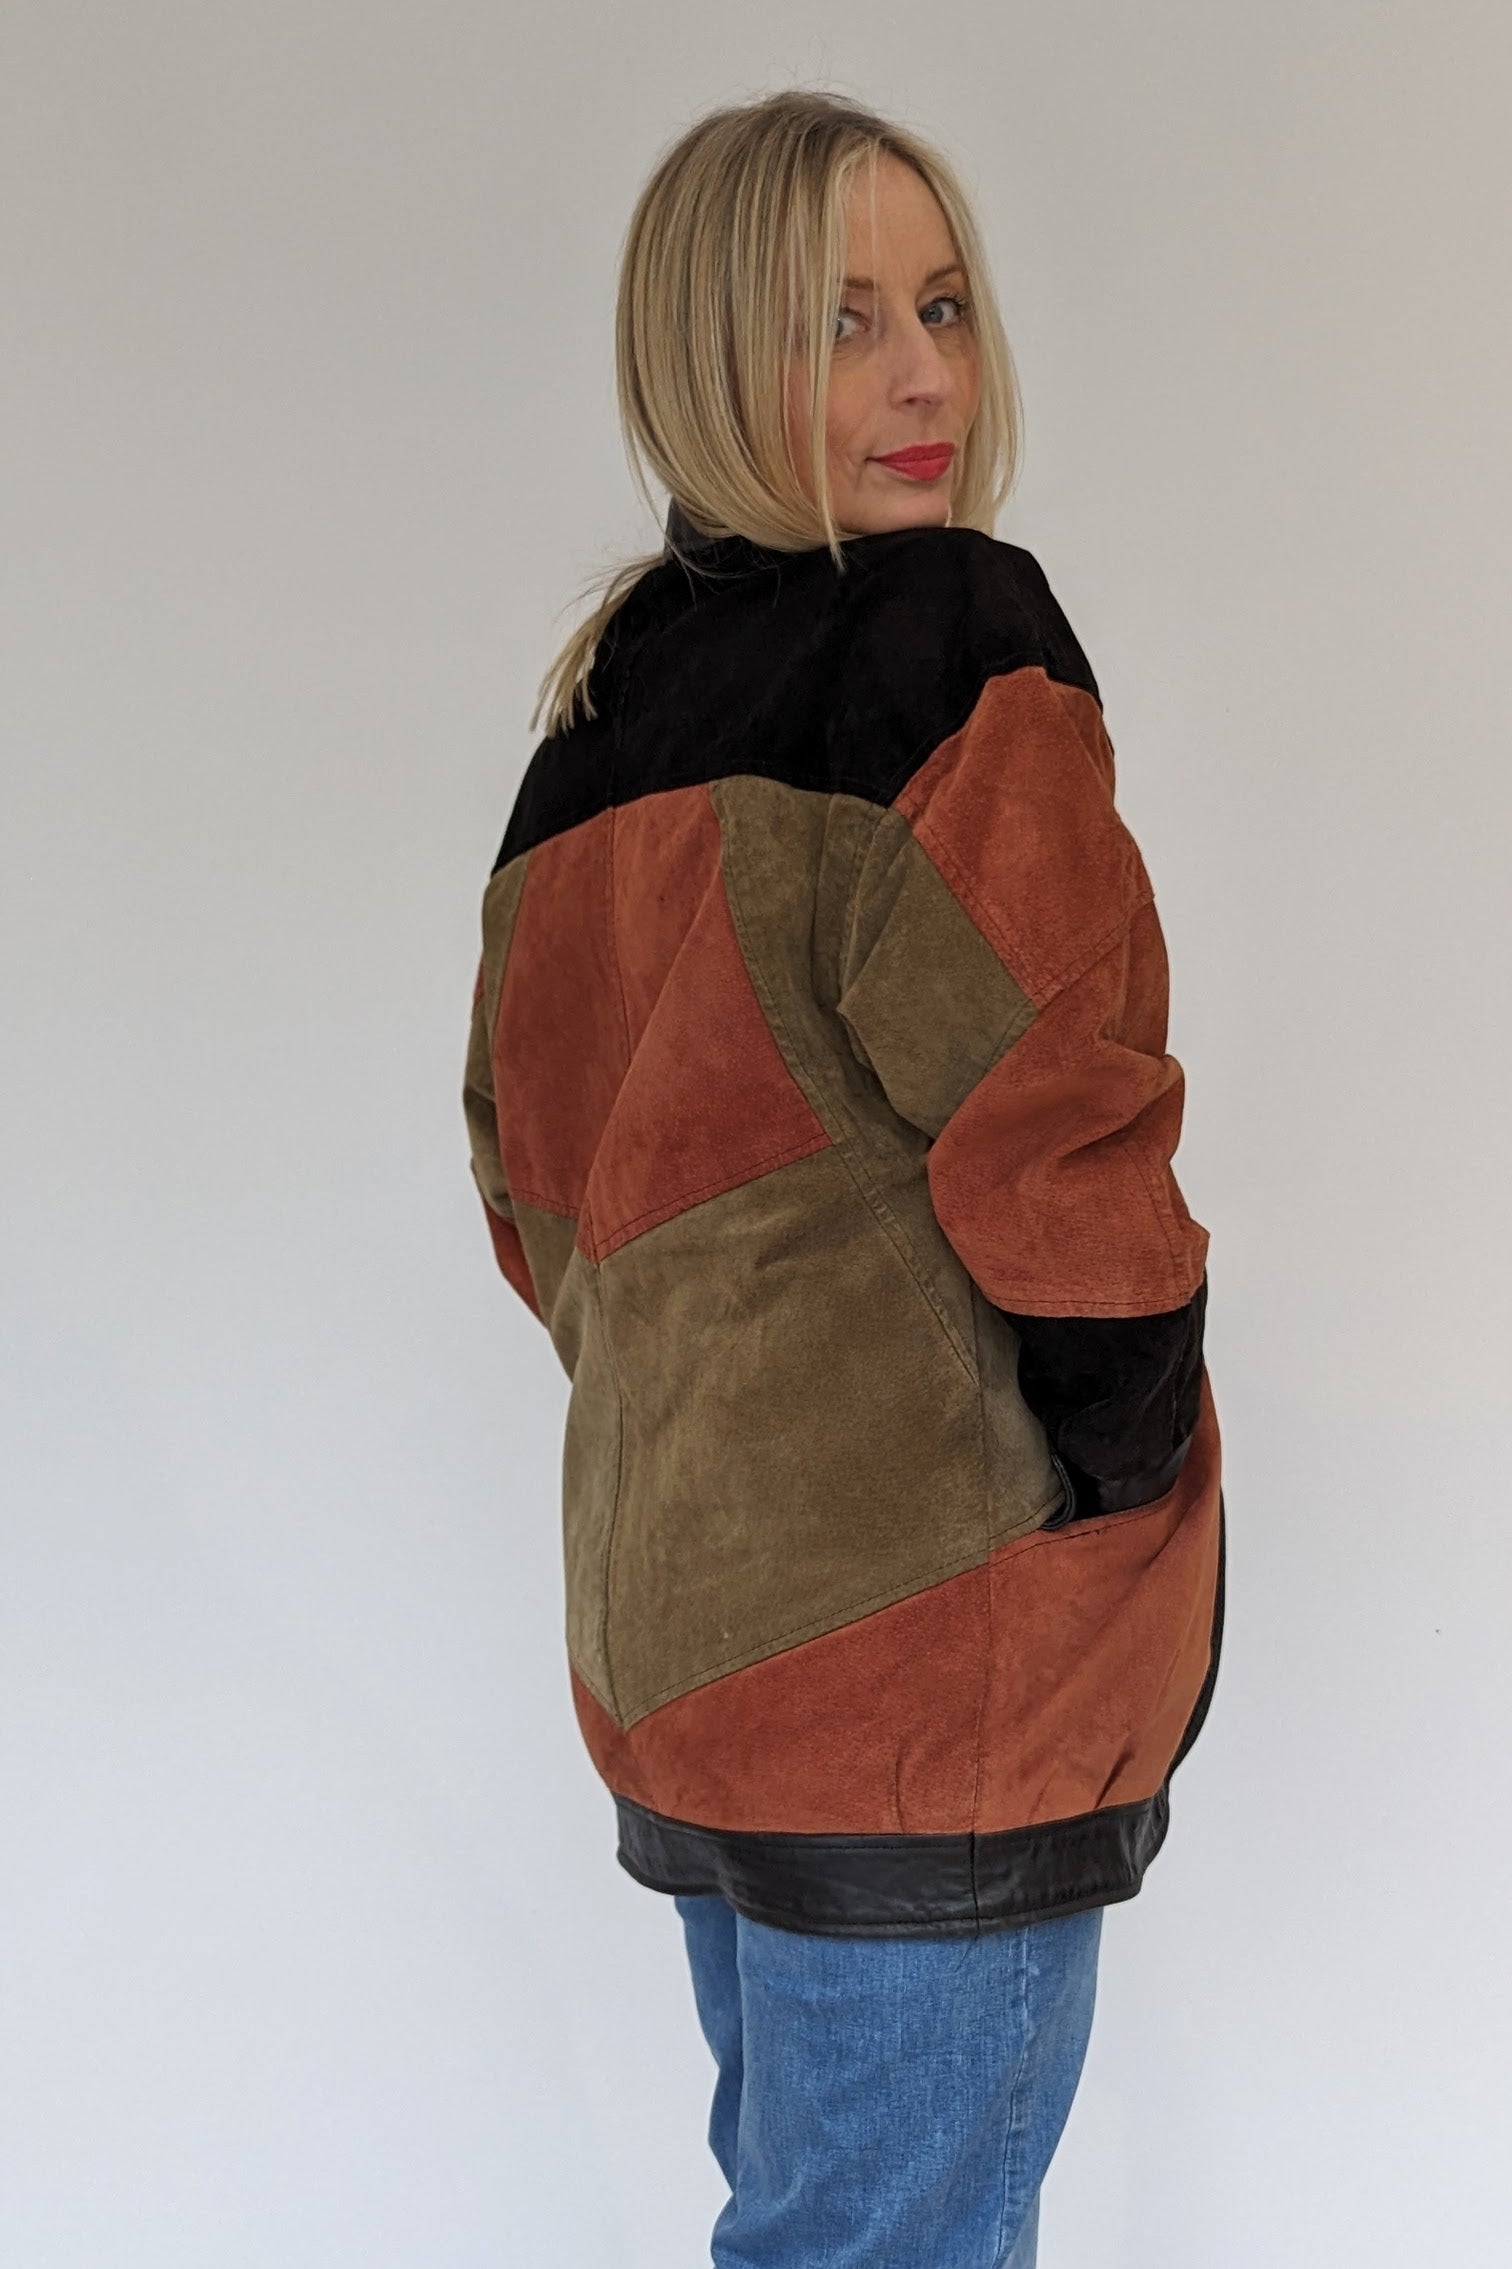 Oversized Suede Patchwork Ladies Jacket in Khaki, Black and Russet with pockets